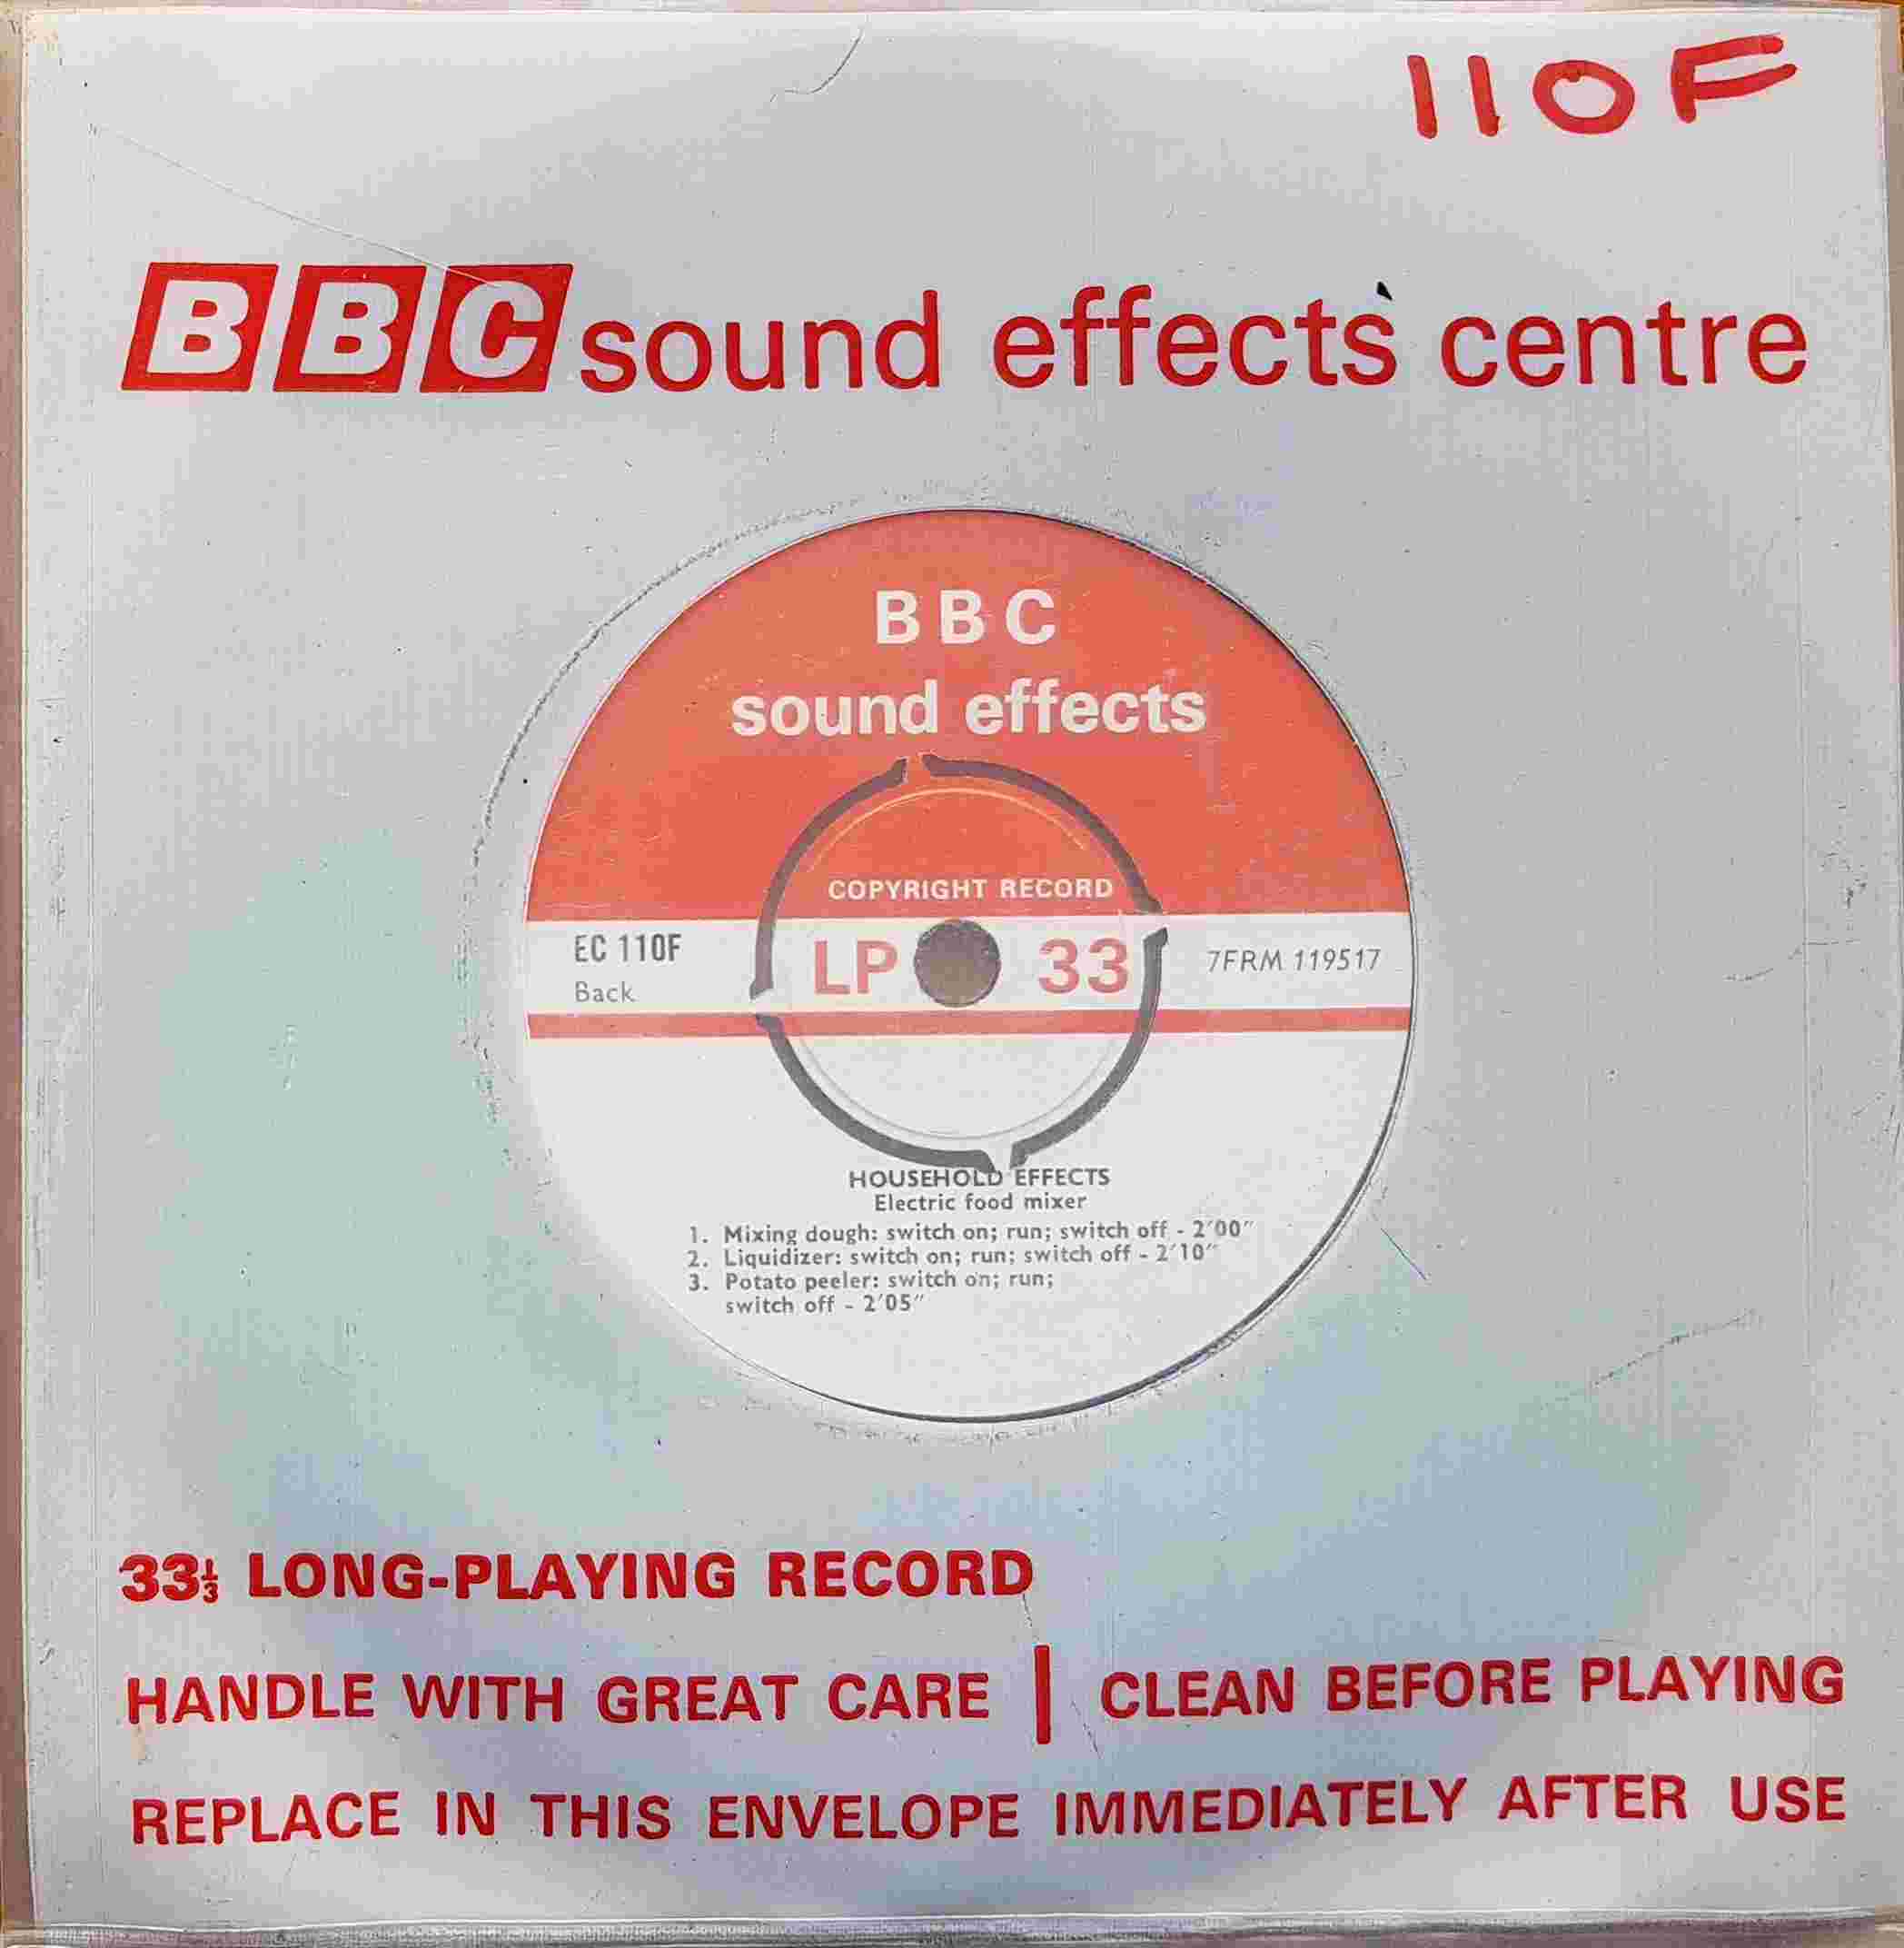 Picture of EC 110F Household effects: Electric food mixer by artist Not registered from the BBC singles - Records and Tapes library